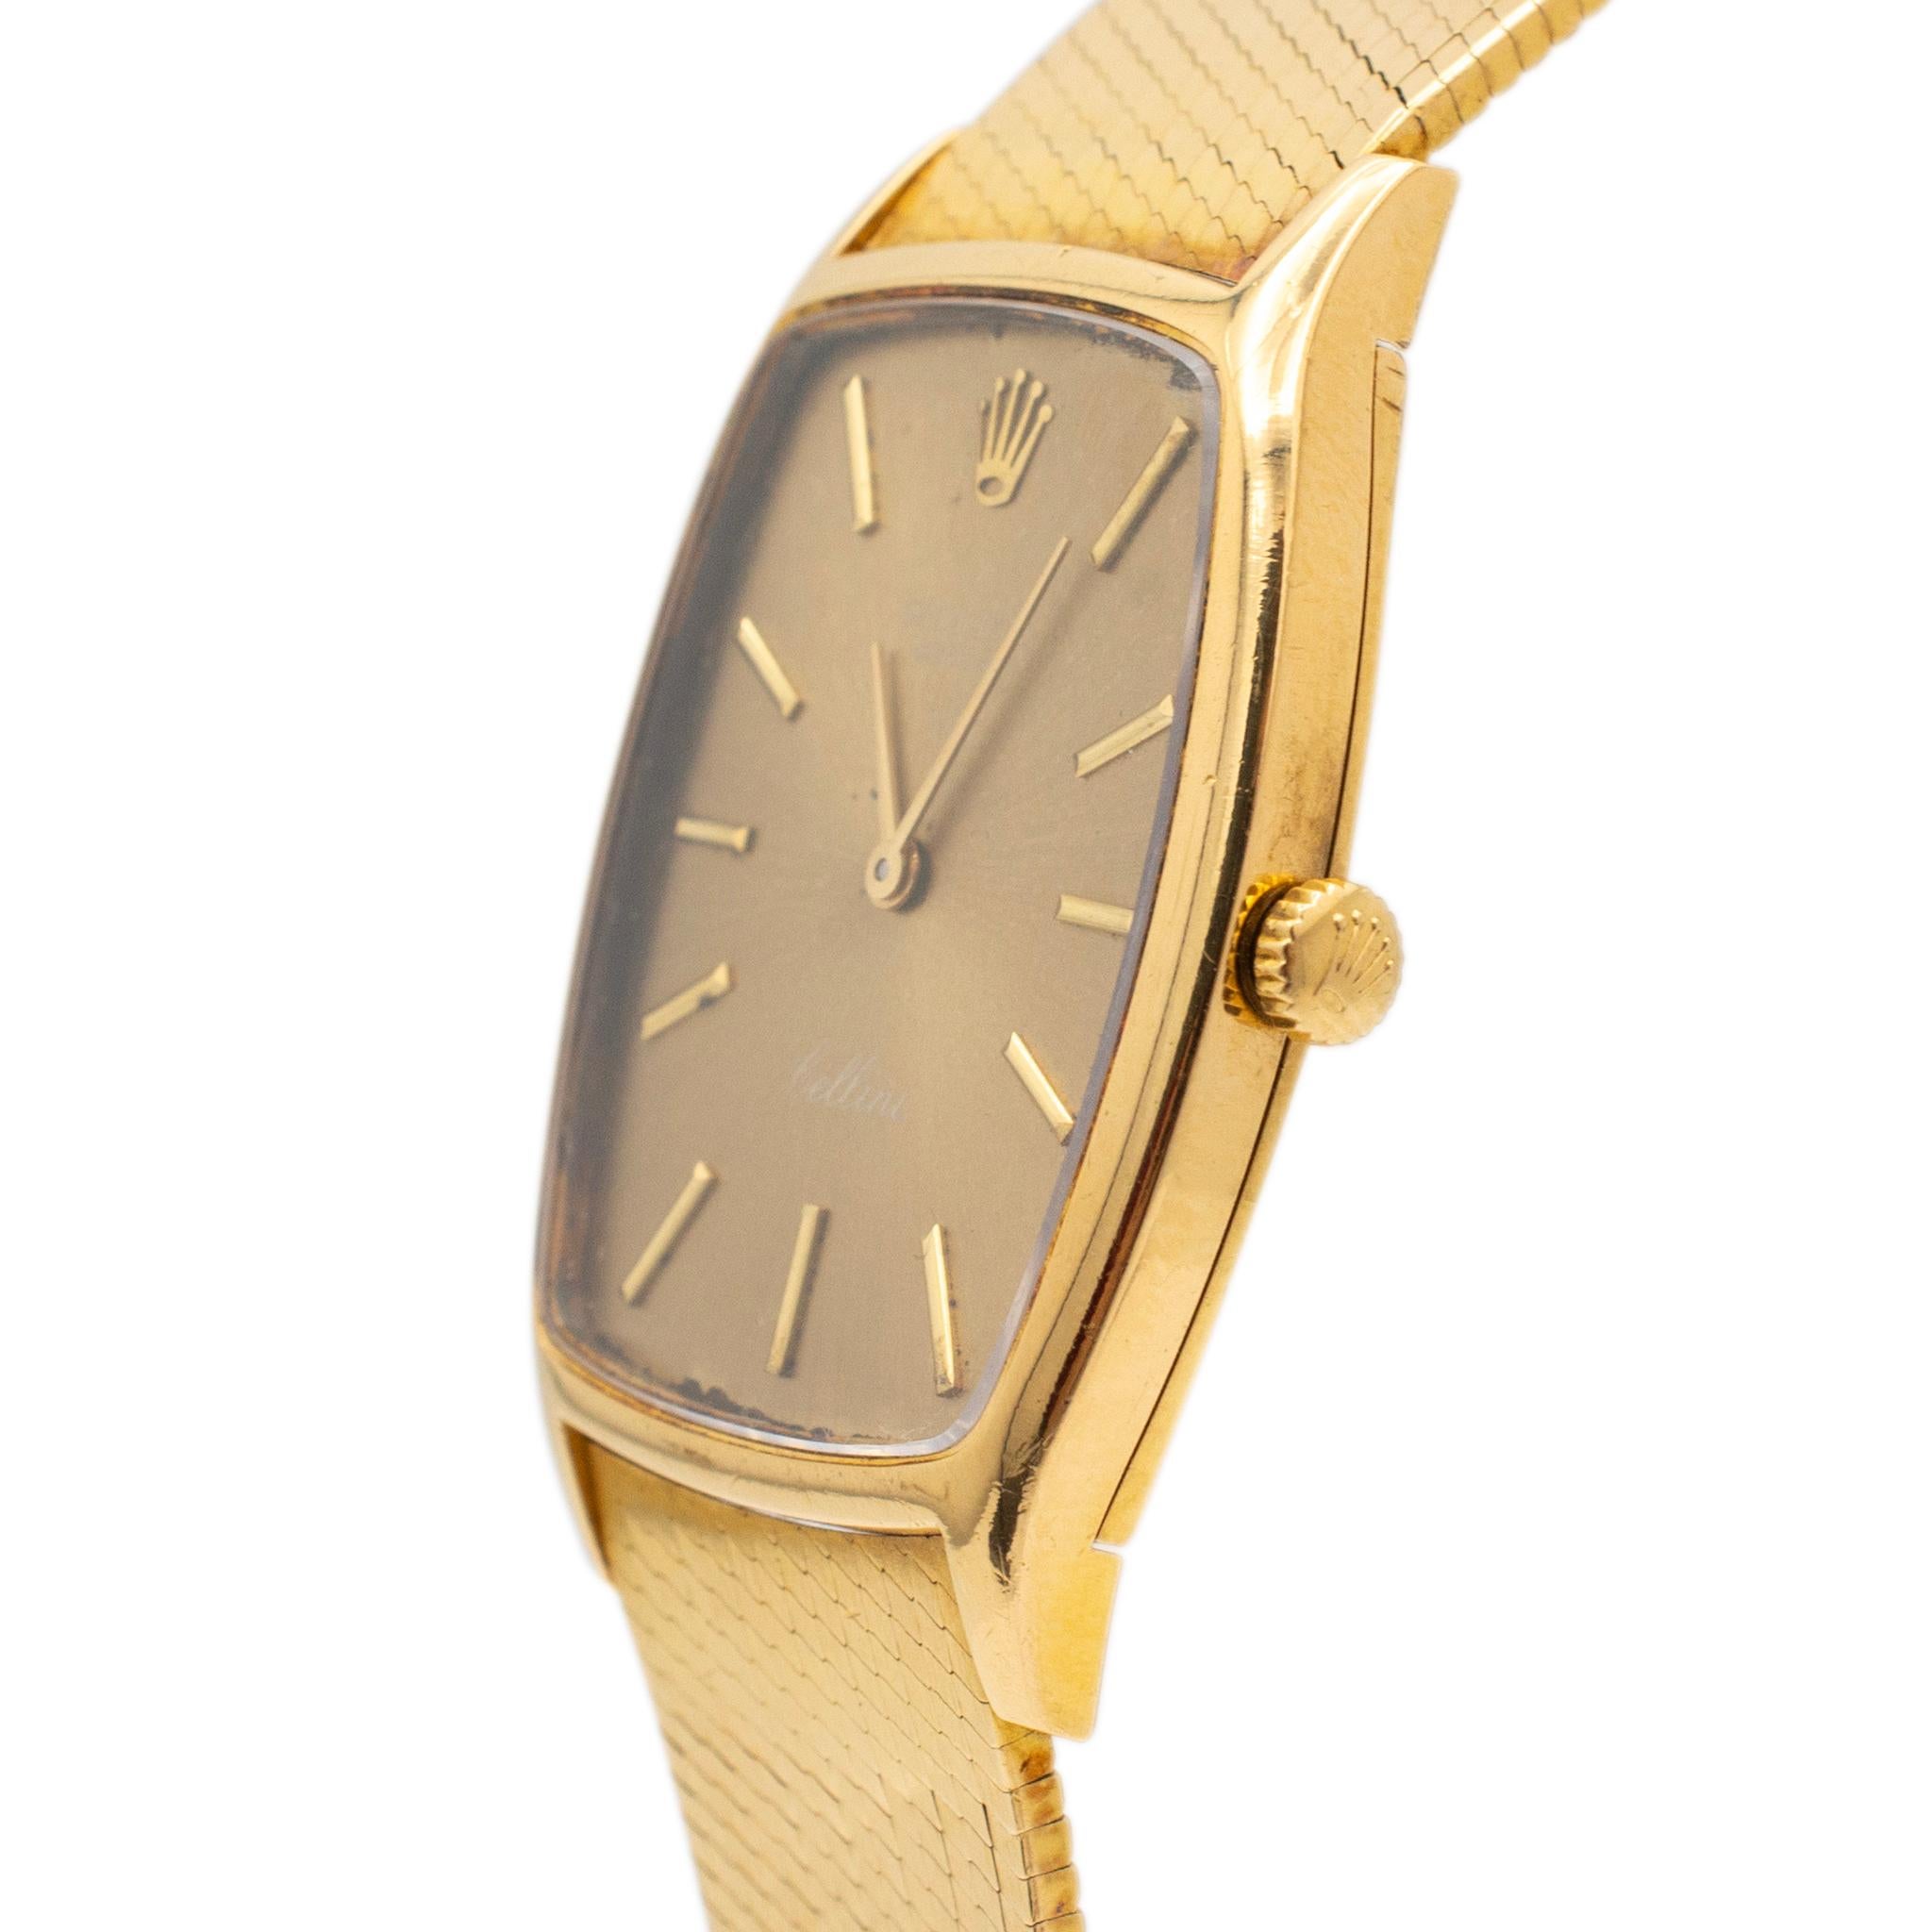 Vintage Rolex Cellini 26MM 3807 Champagne Dial 18K Yellow Gold Watch In Good Condition For Sale In Houston, TX